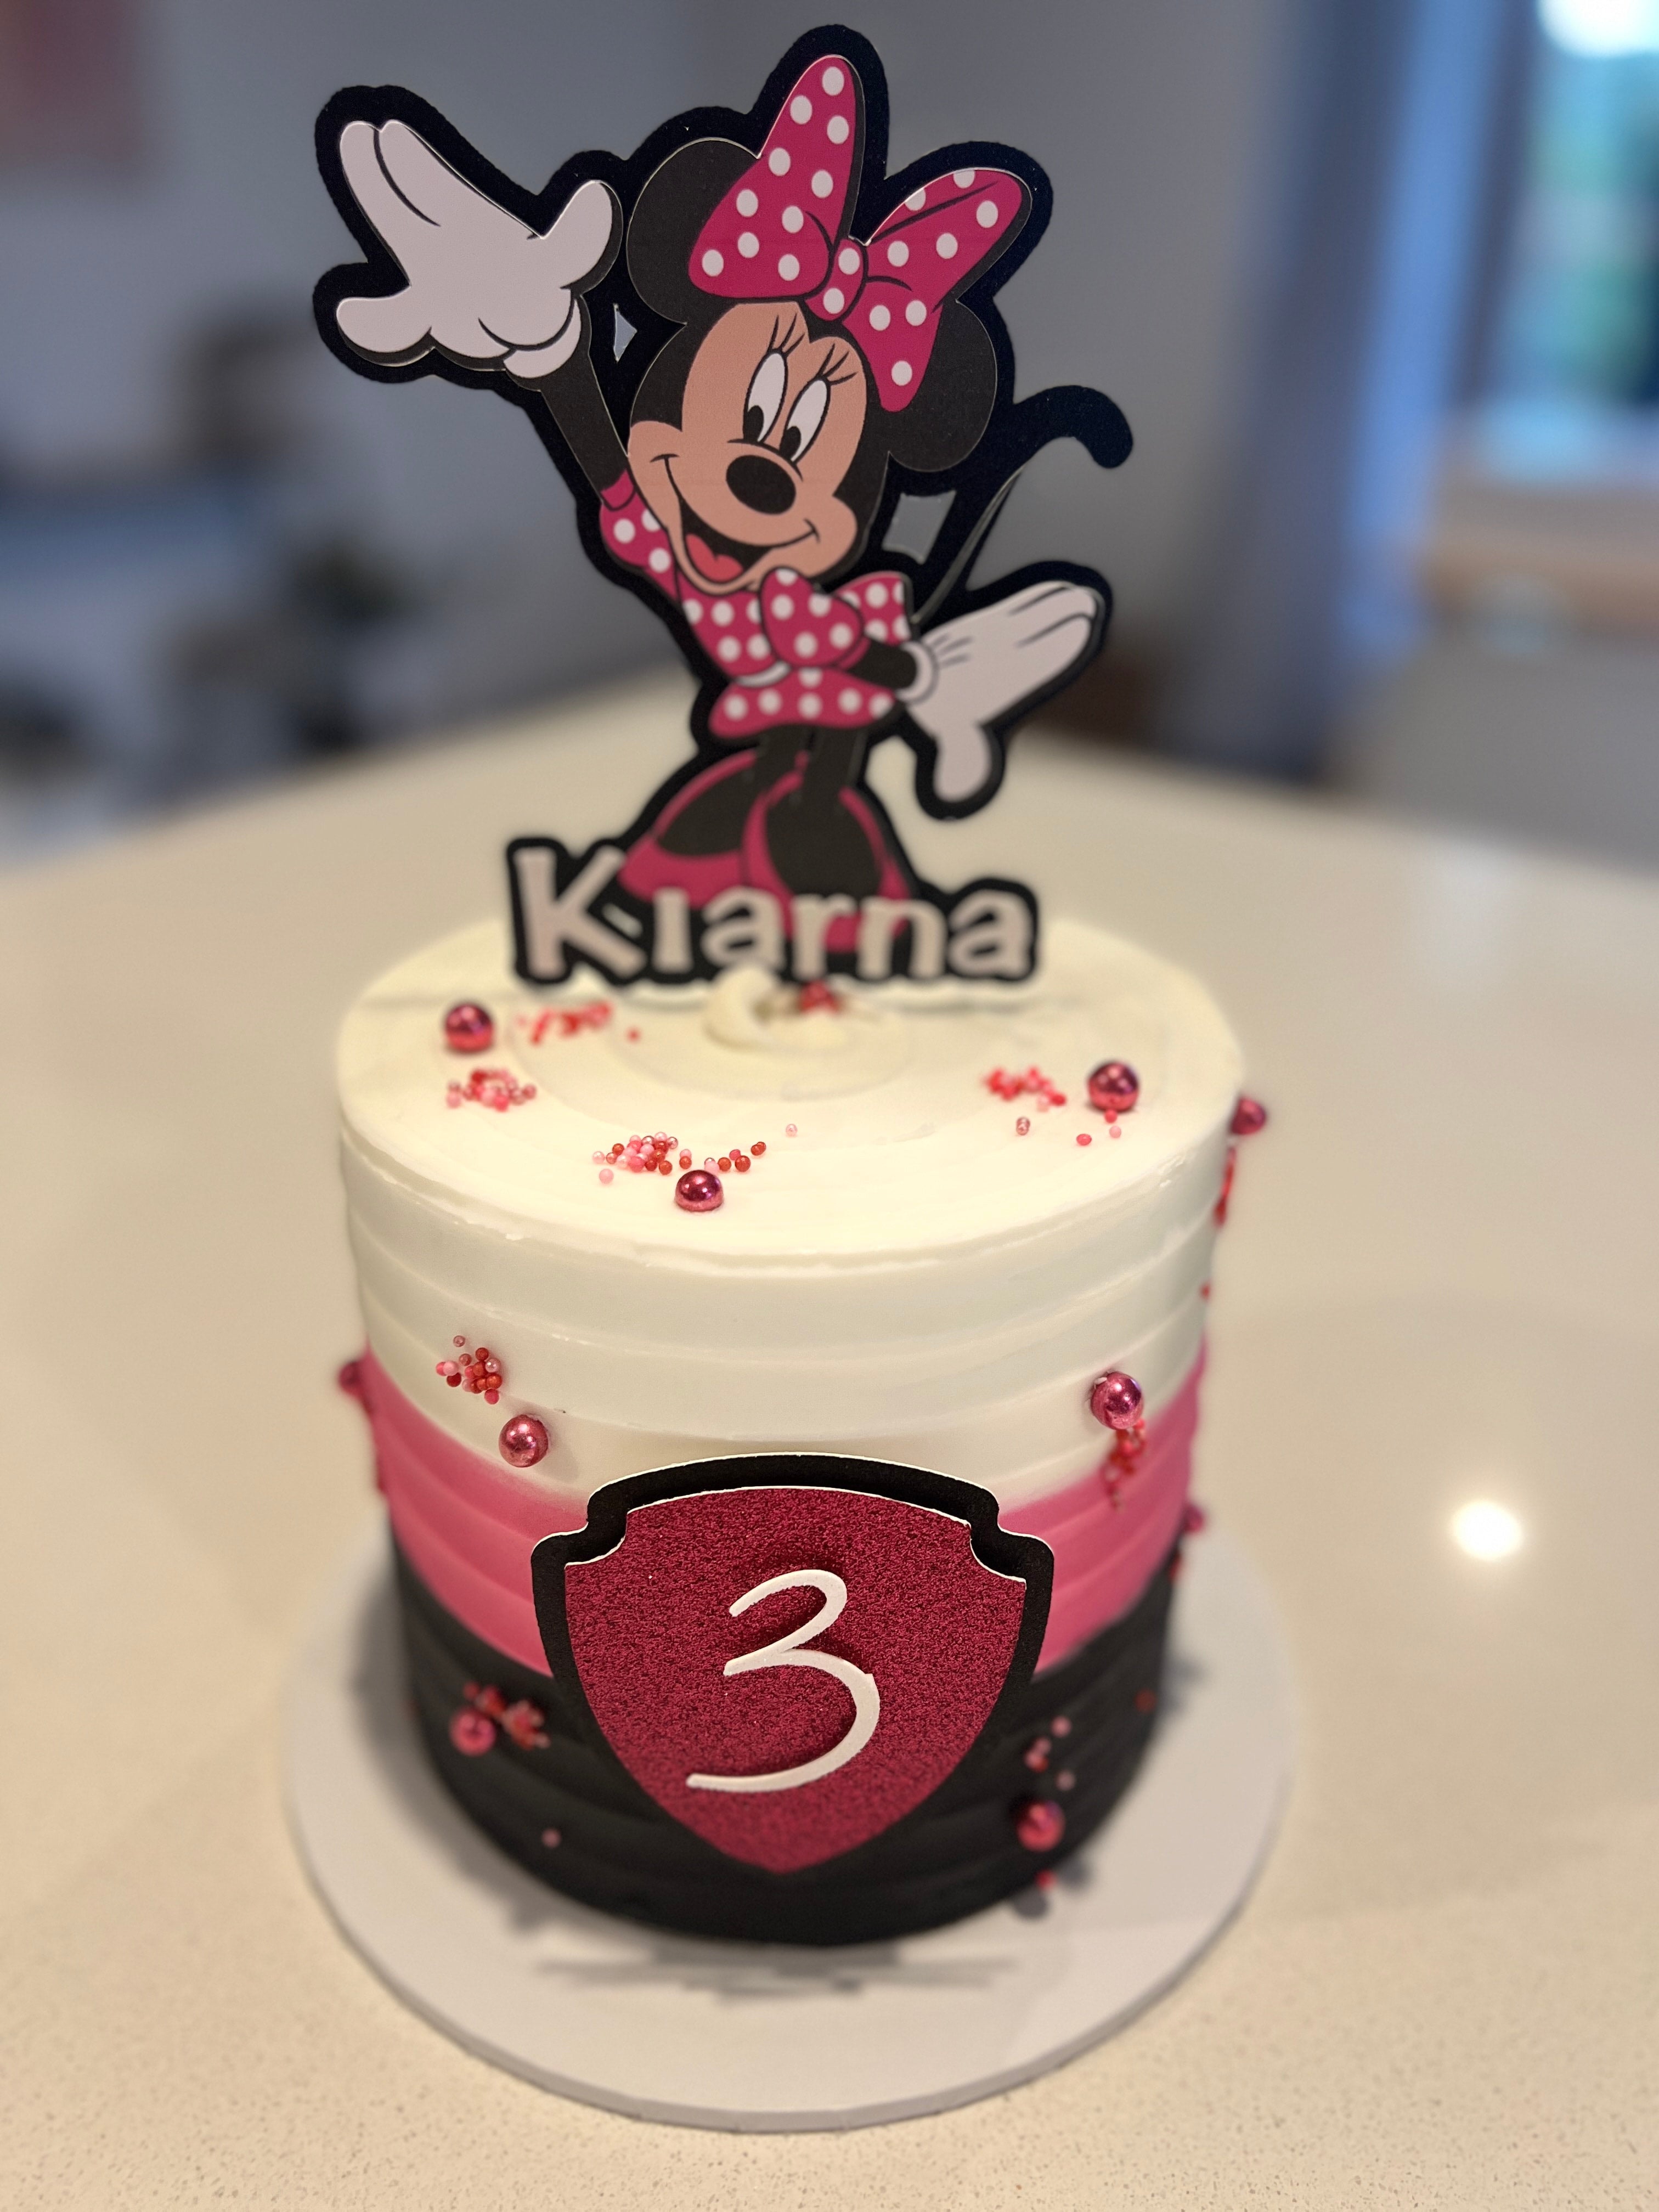 Mickey Mouse Cake - Edible Perfections